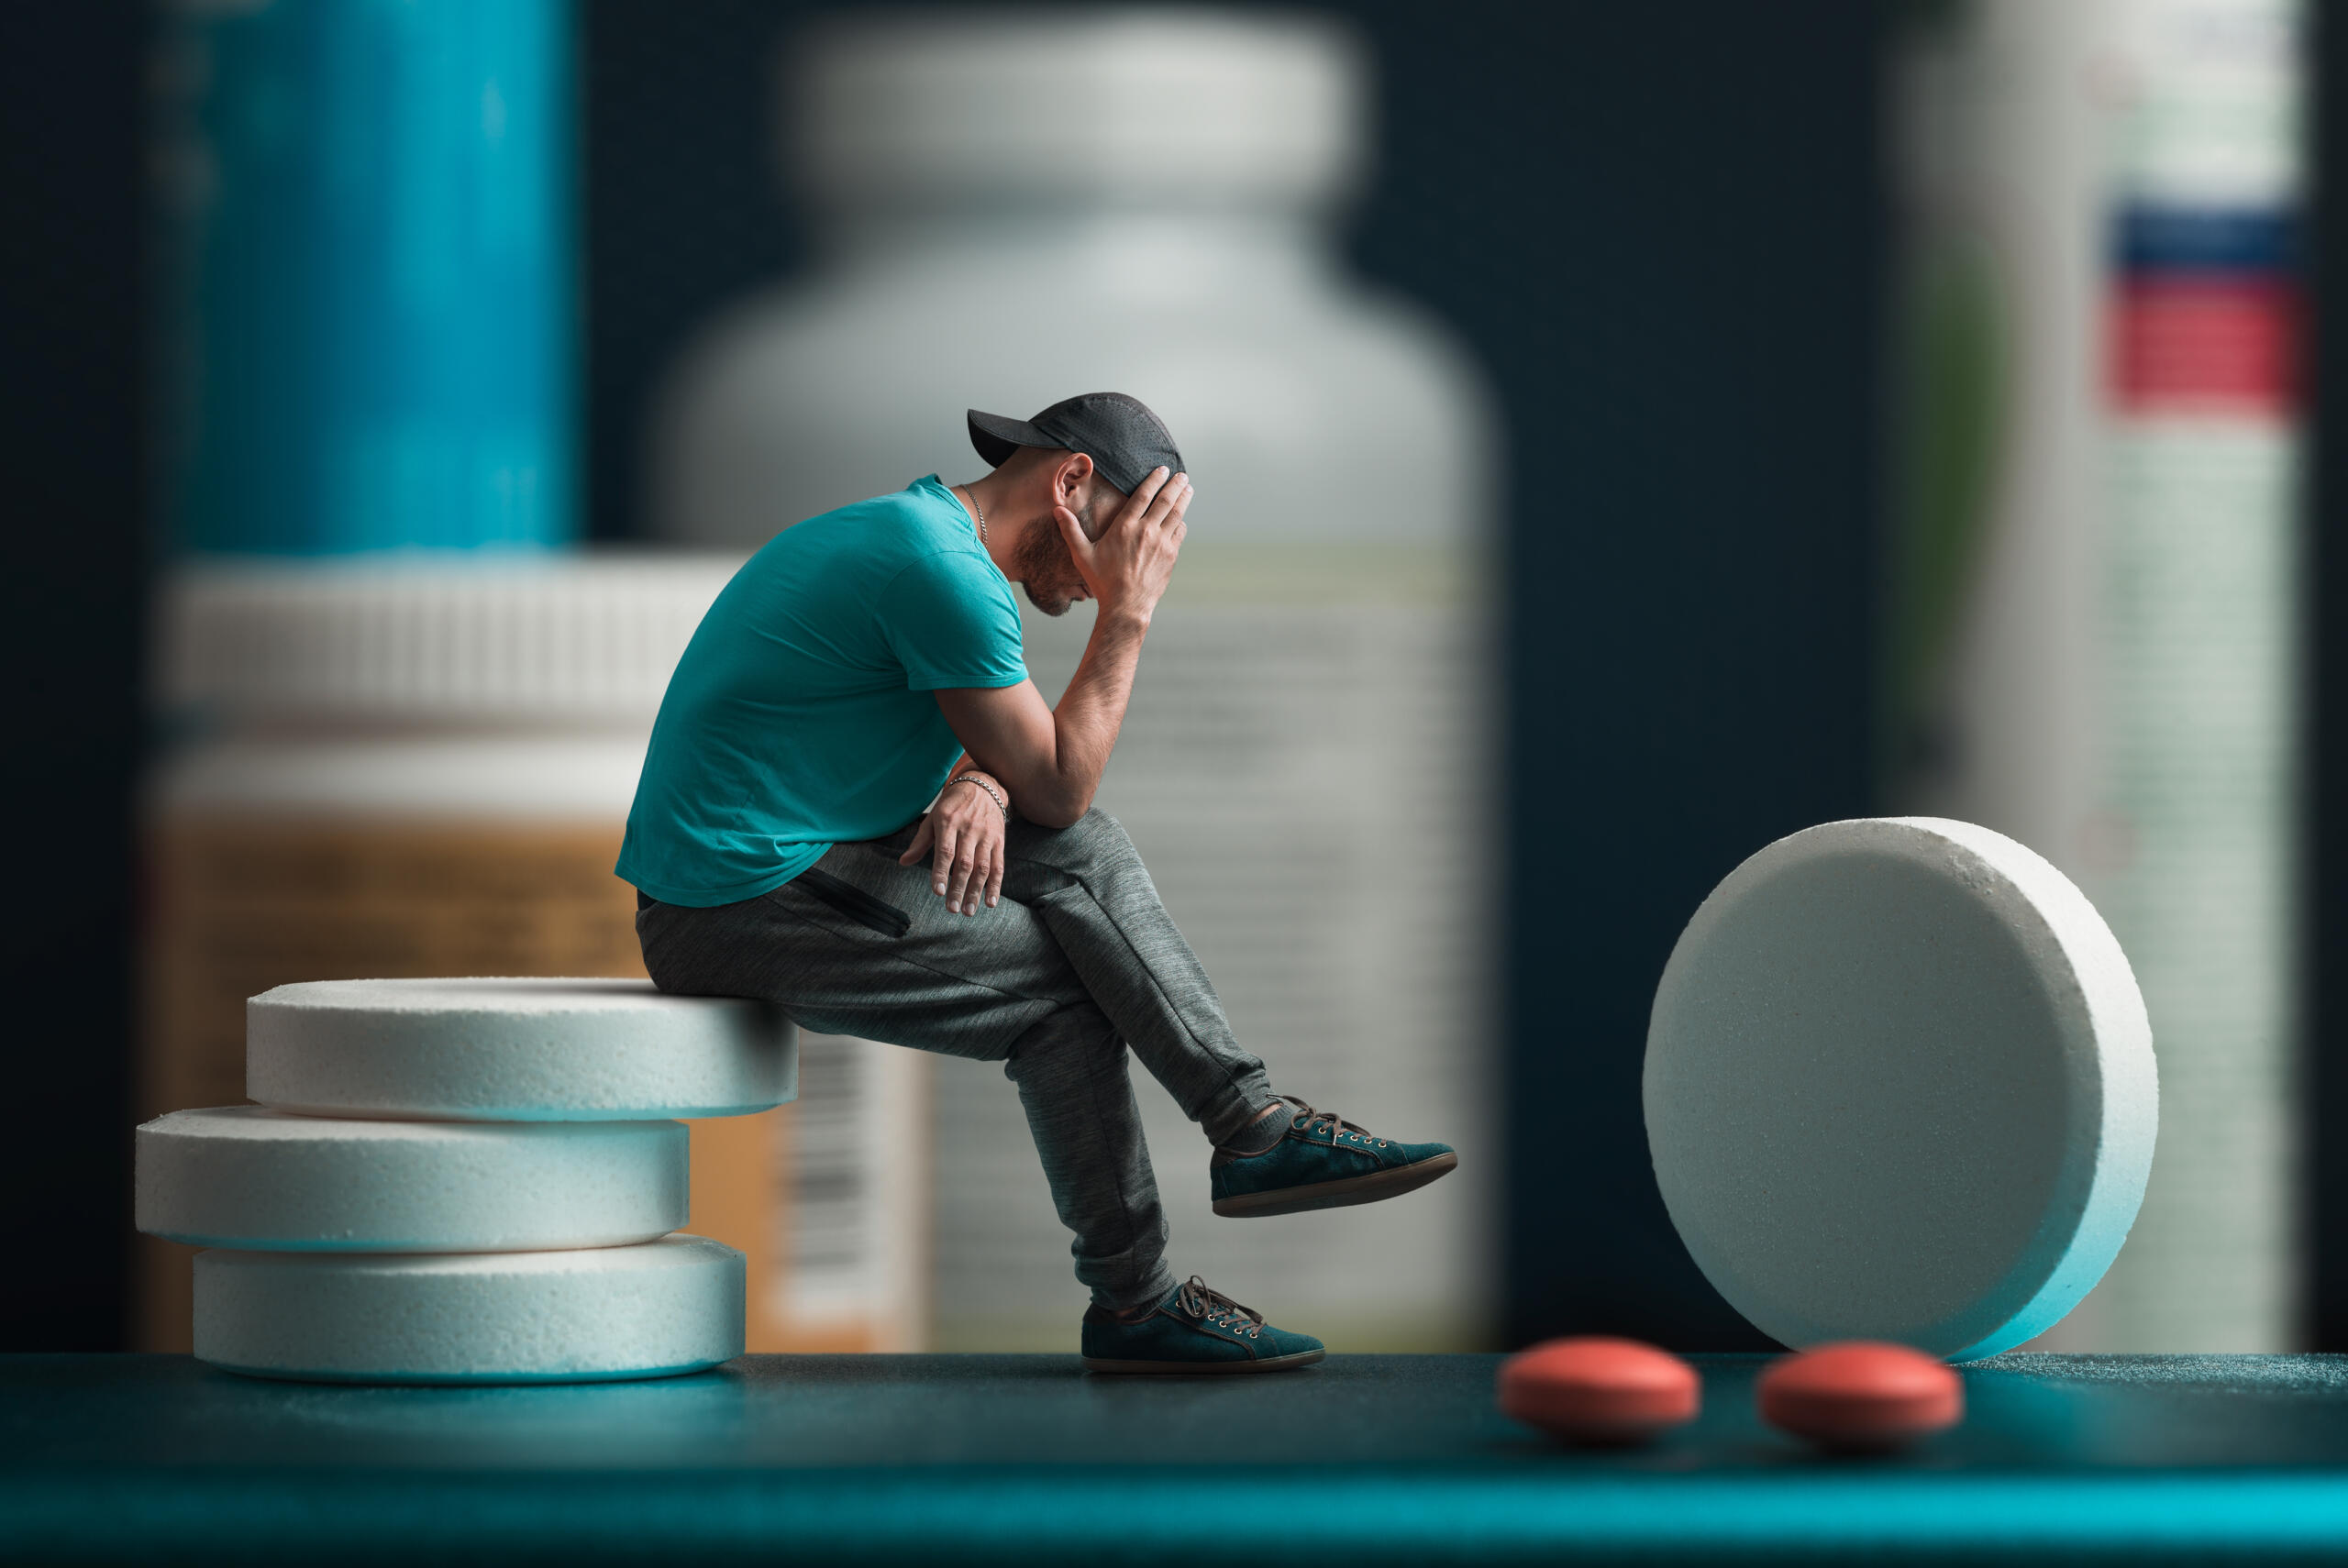 The man sitting on the pills. He's depressed. Flacons of medicines in the background.